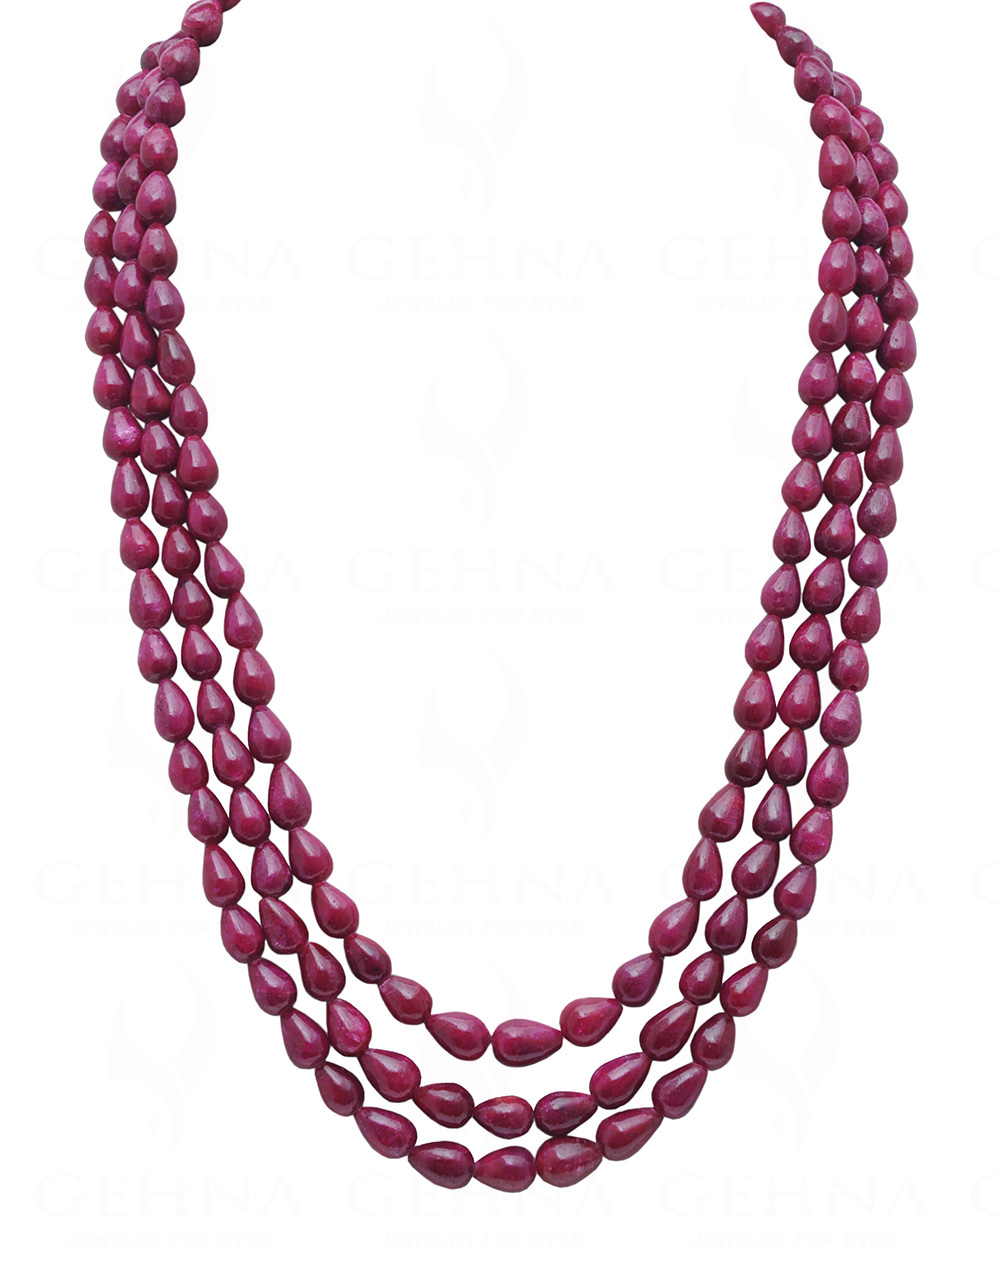 3 Rows Of Natural Ruby Gemstone Drop Shaped Bead Necklace NP-1300